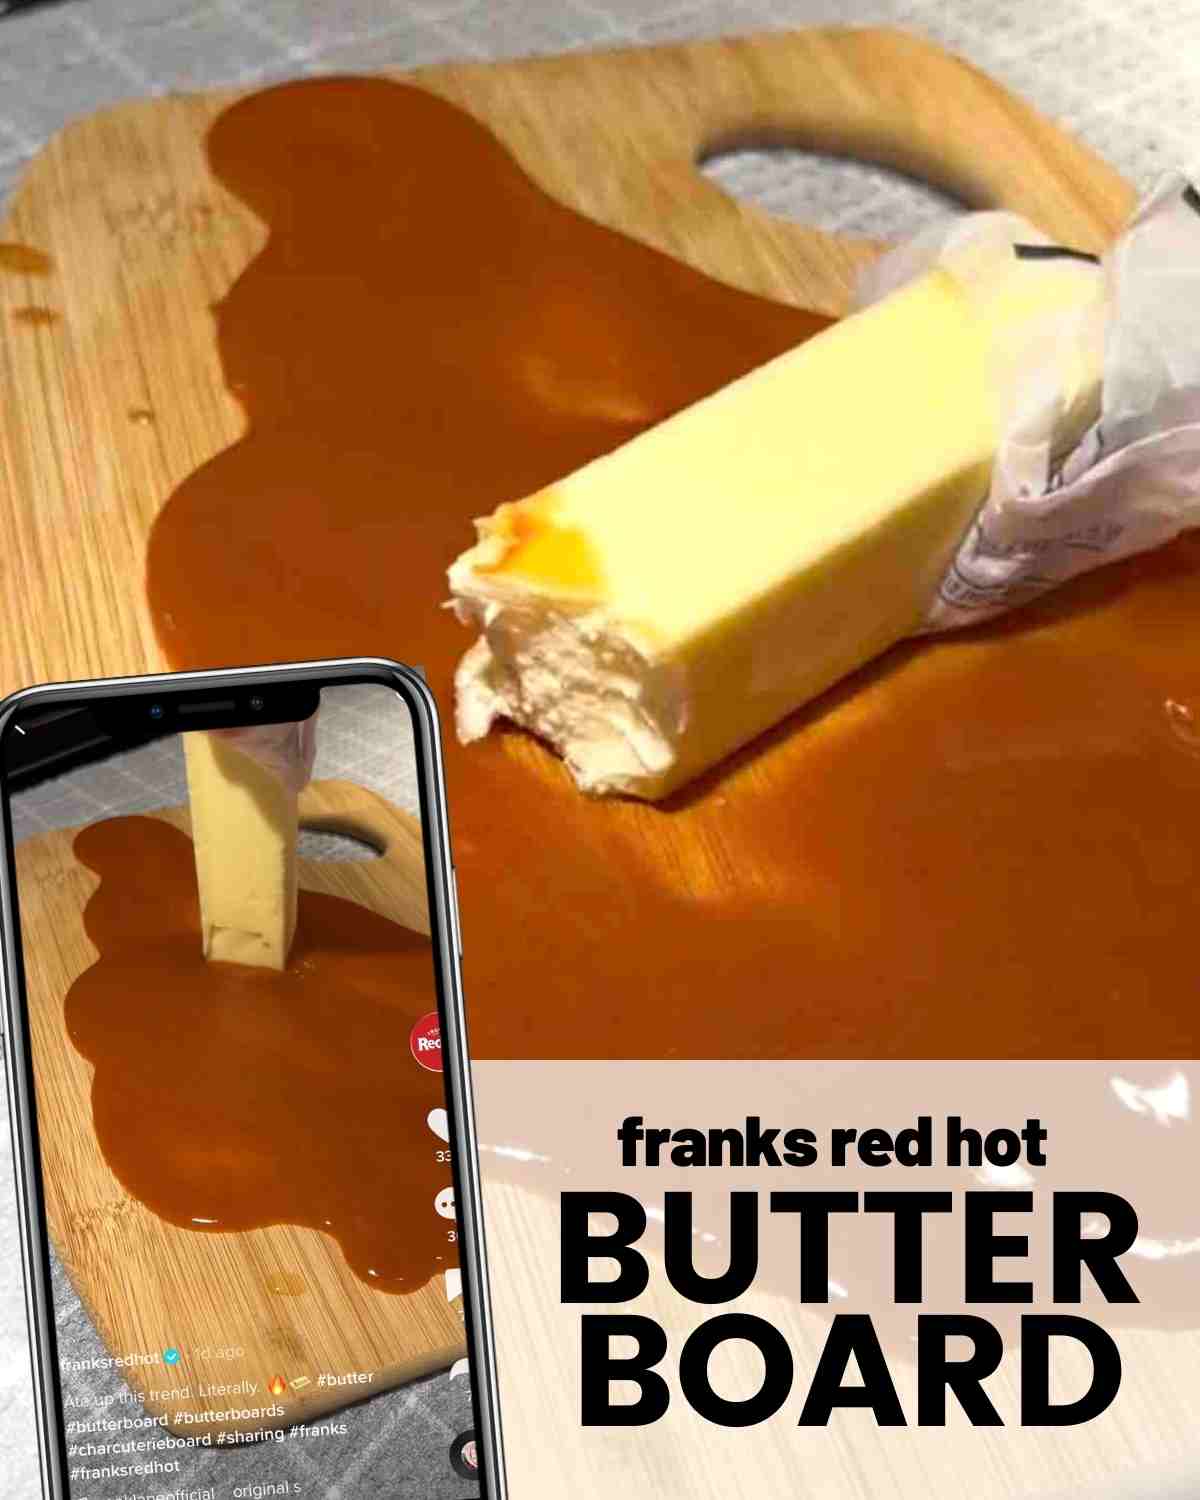 franks red hot butter board recipe